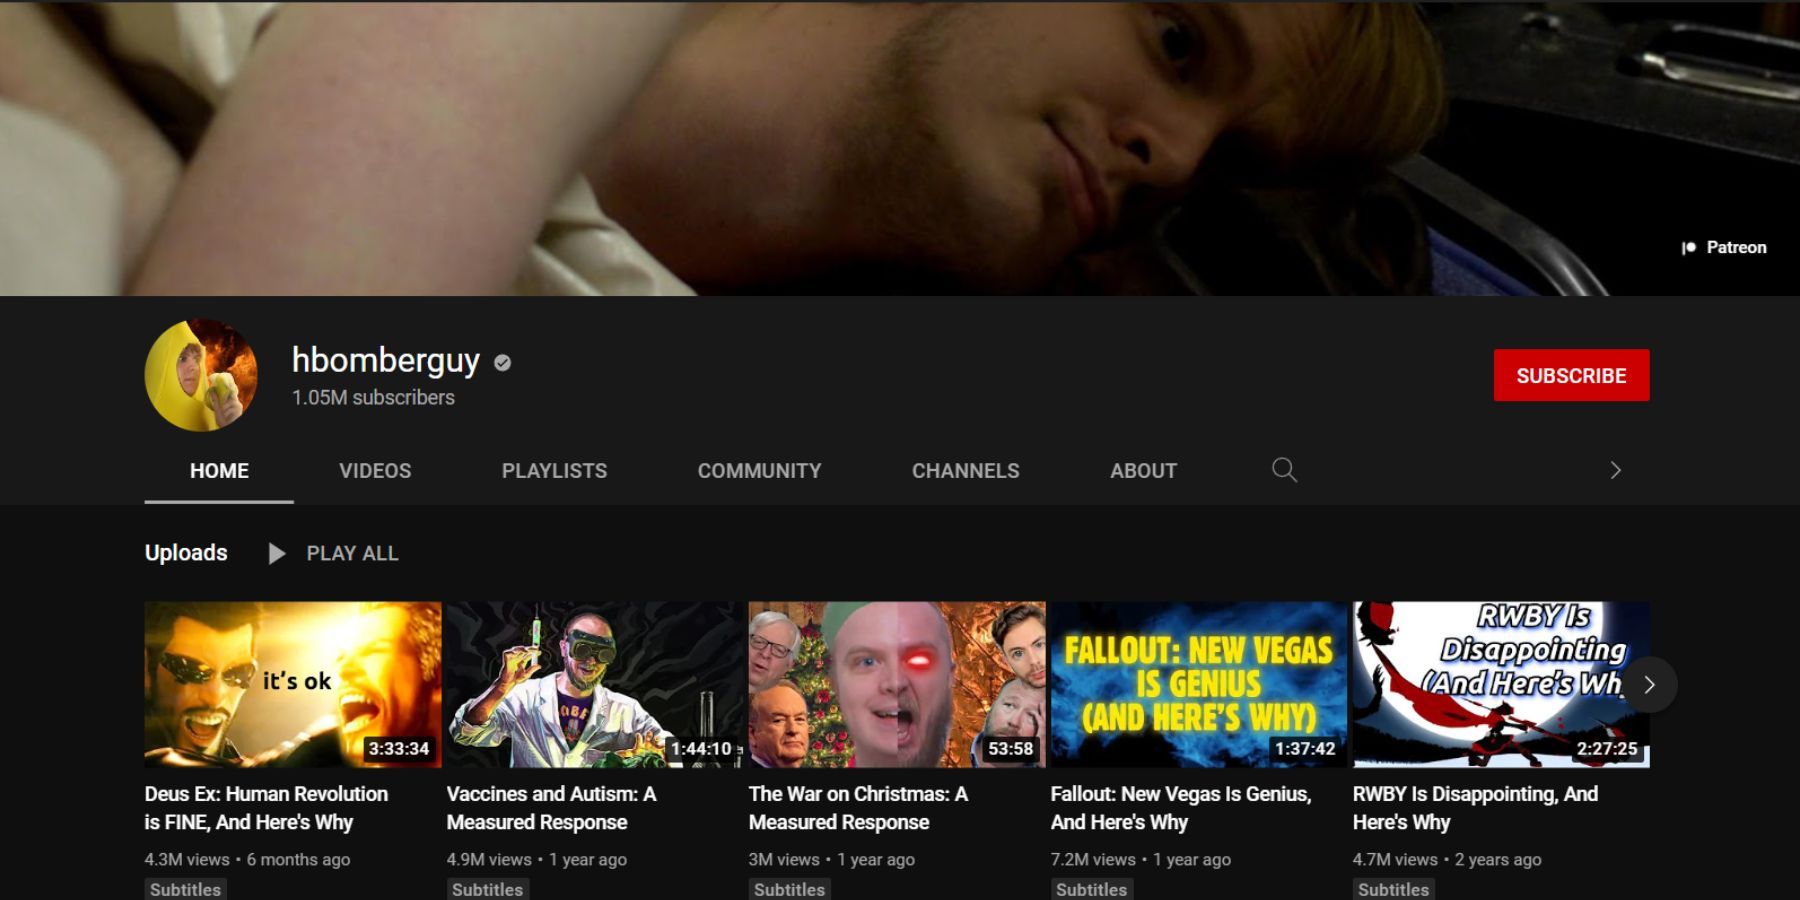 Channel page for Hbomberguy on YouTube